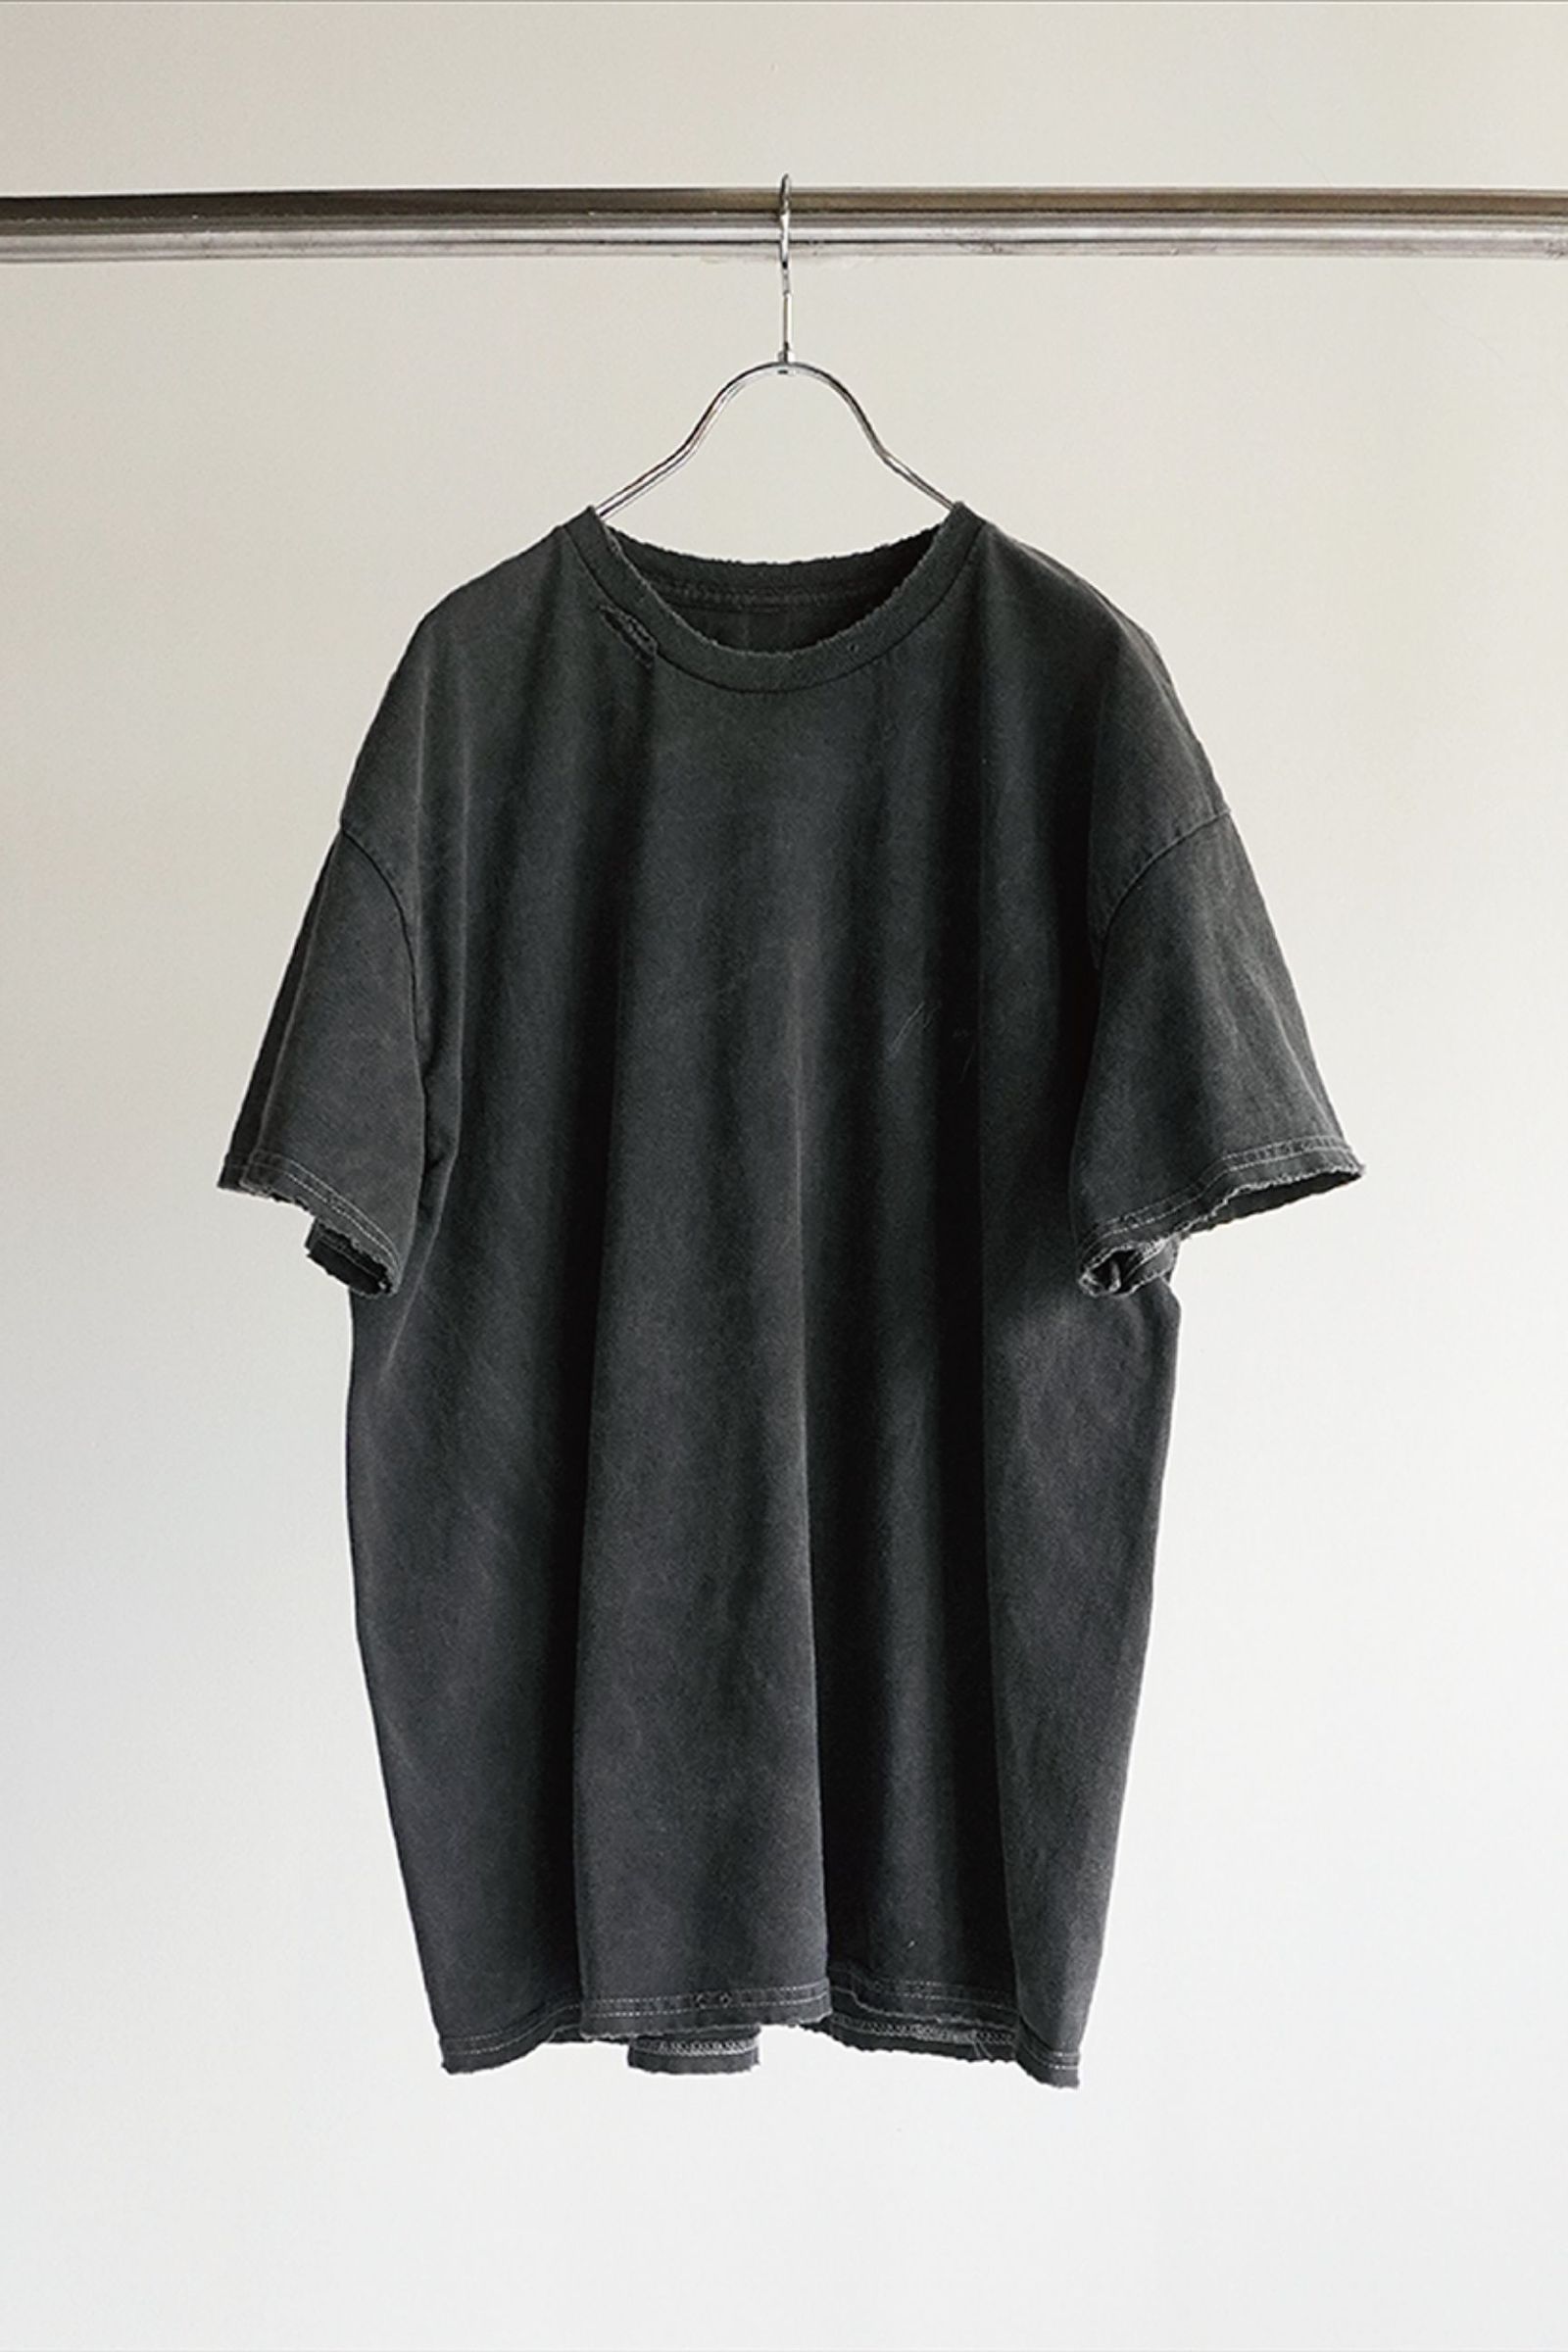 ANCELLM - EMBROIDERY DYED T-SHIRT/F.BLACK | NapsNote